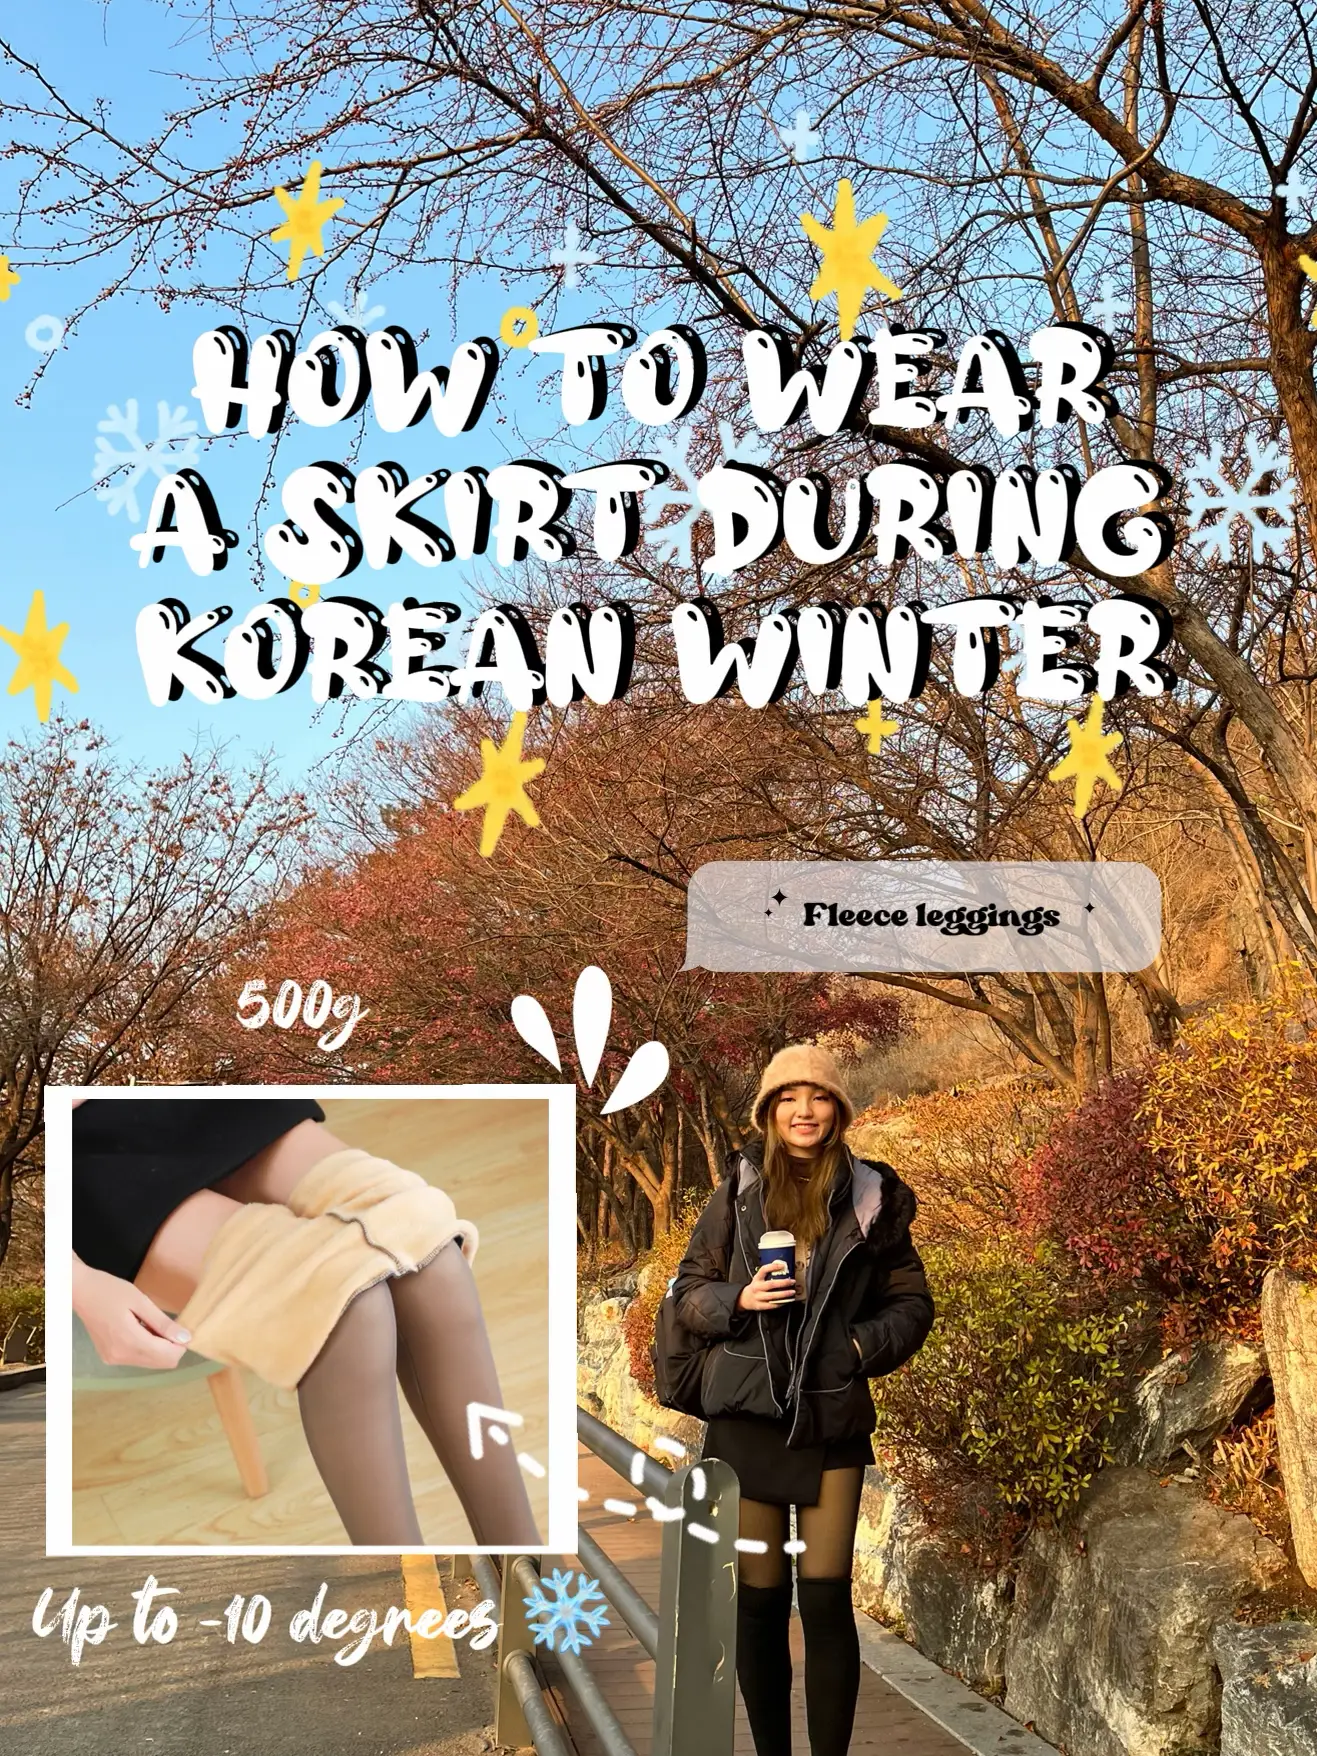 How To Wear Tights This Winter, According To Stylists